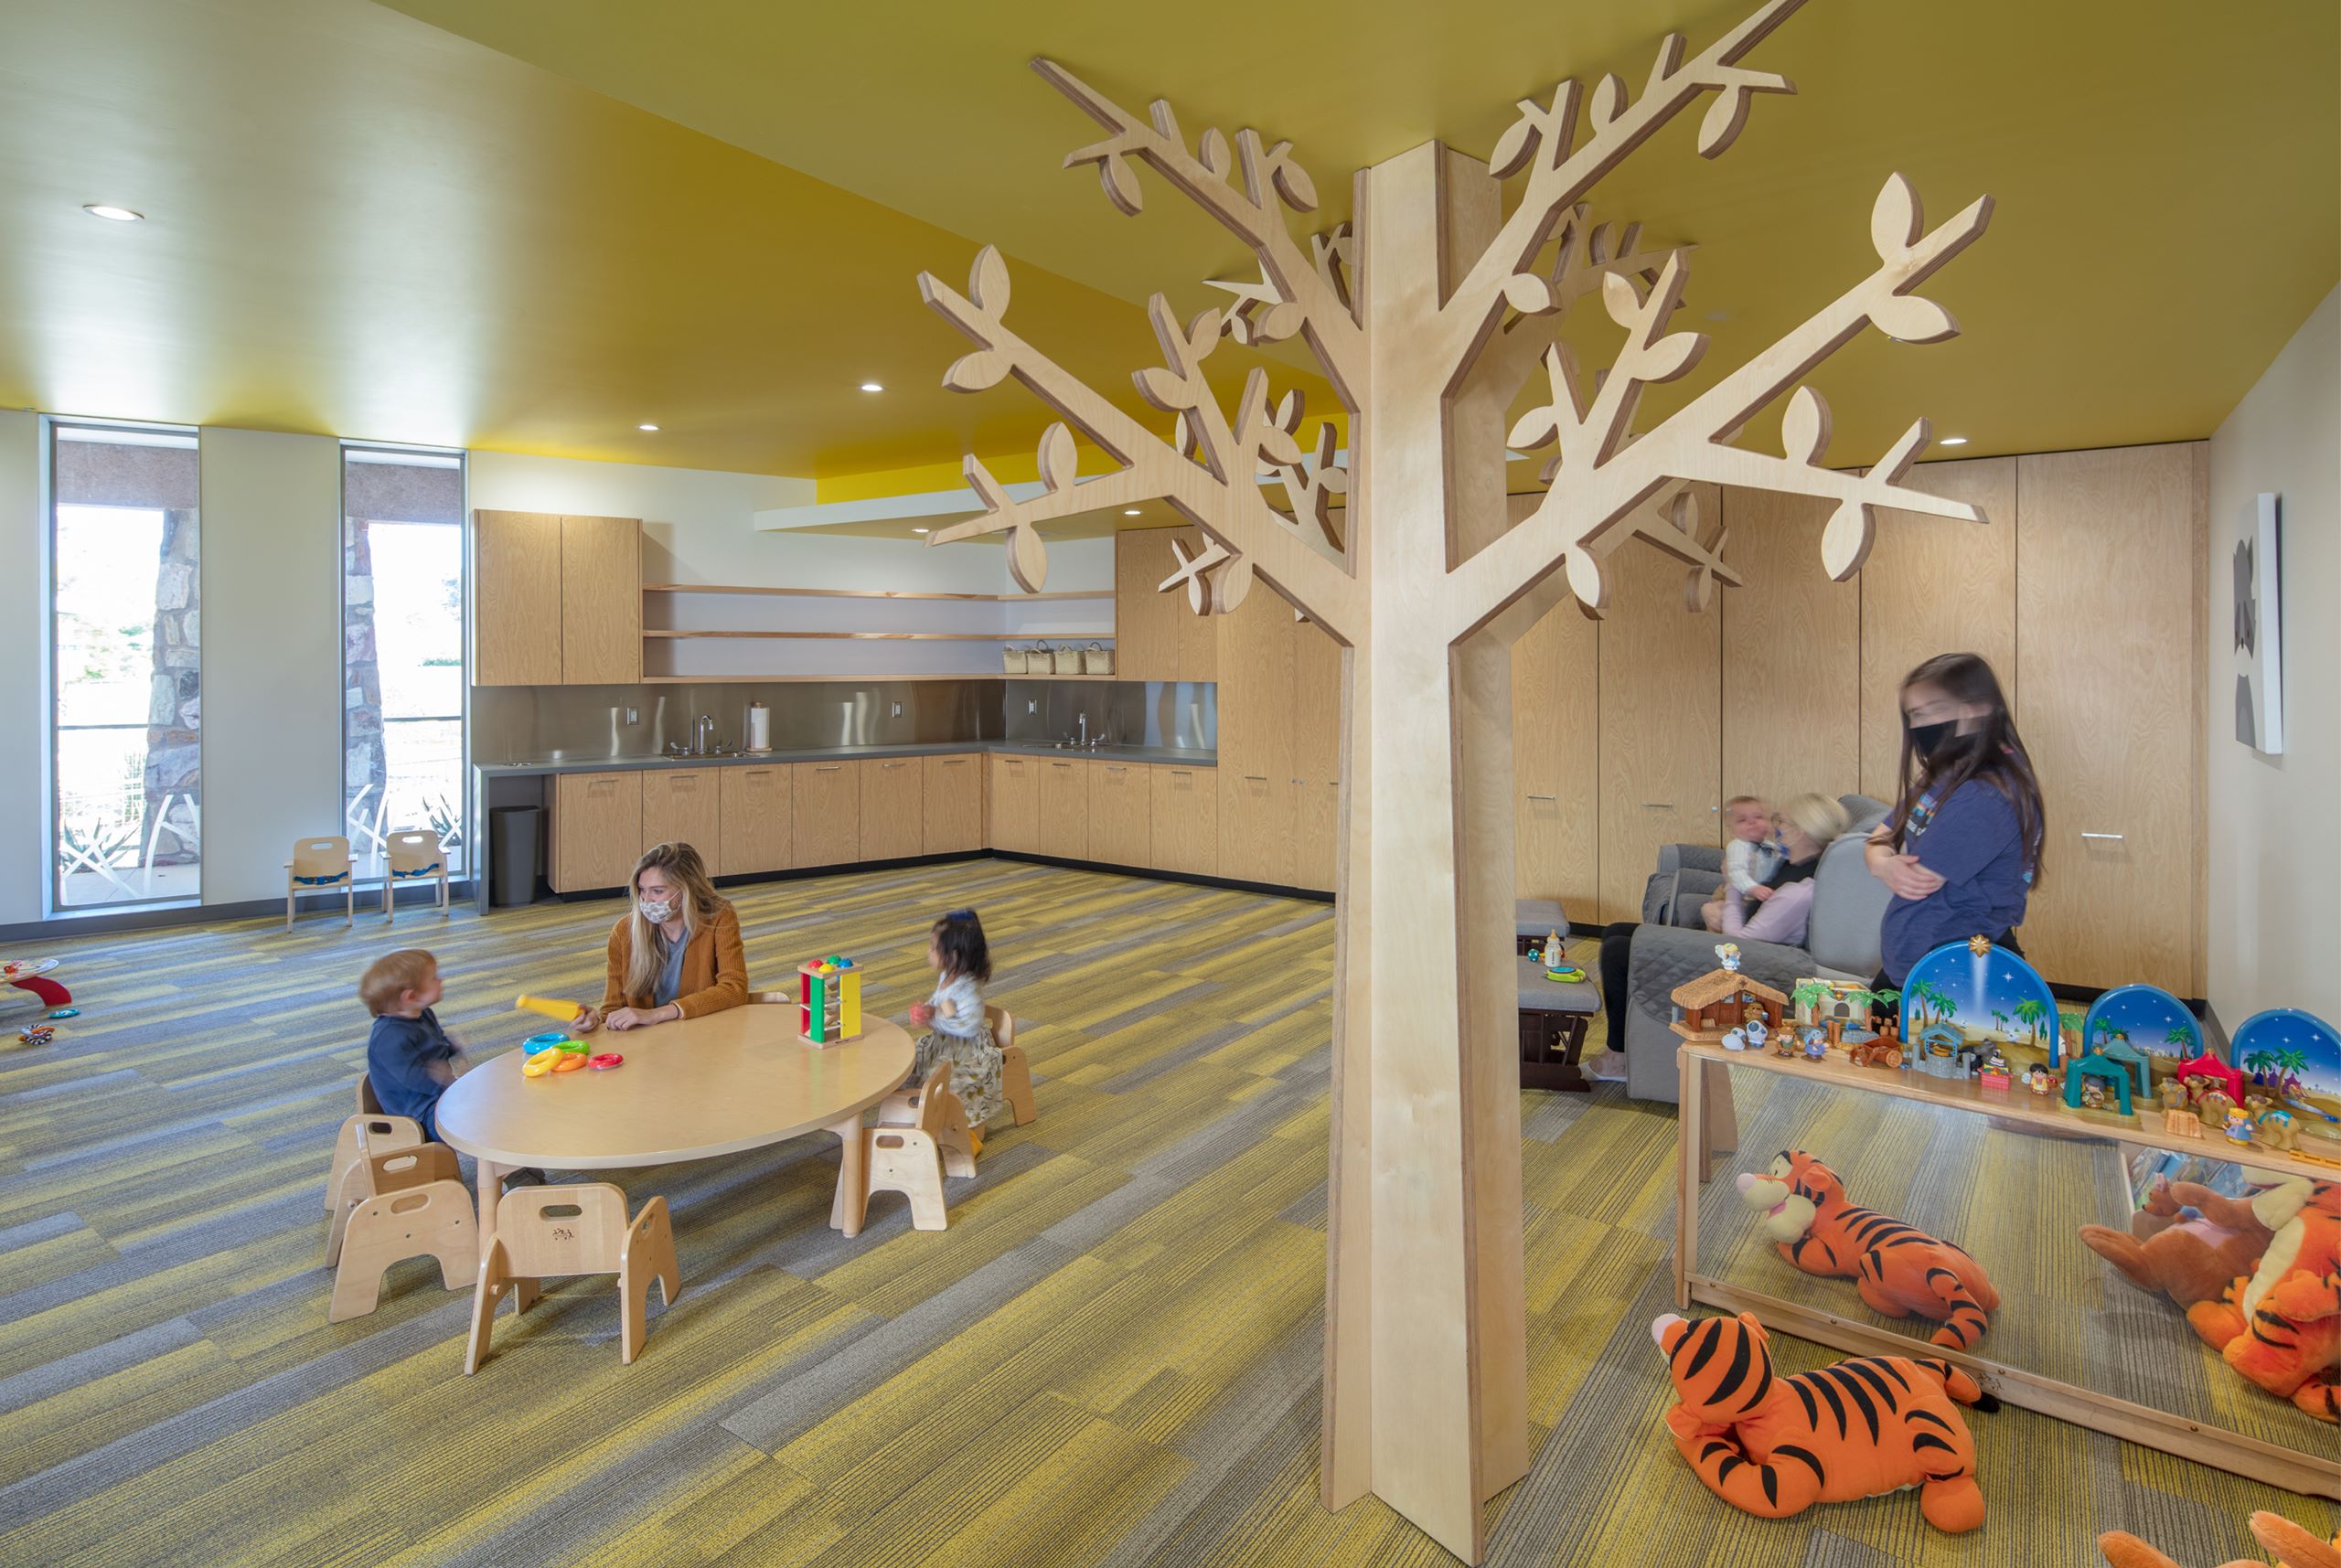 nursery, woodworking, plywood tree, yellow, colorful room